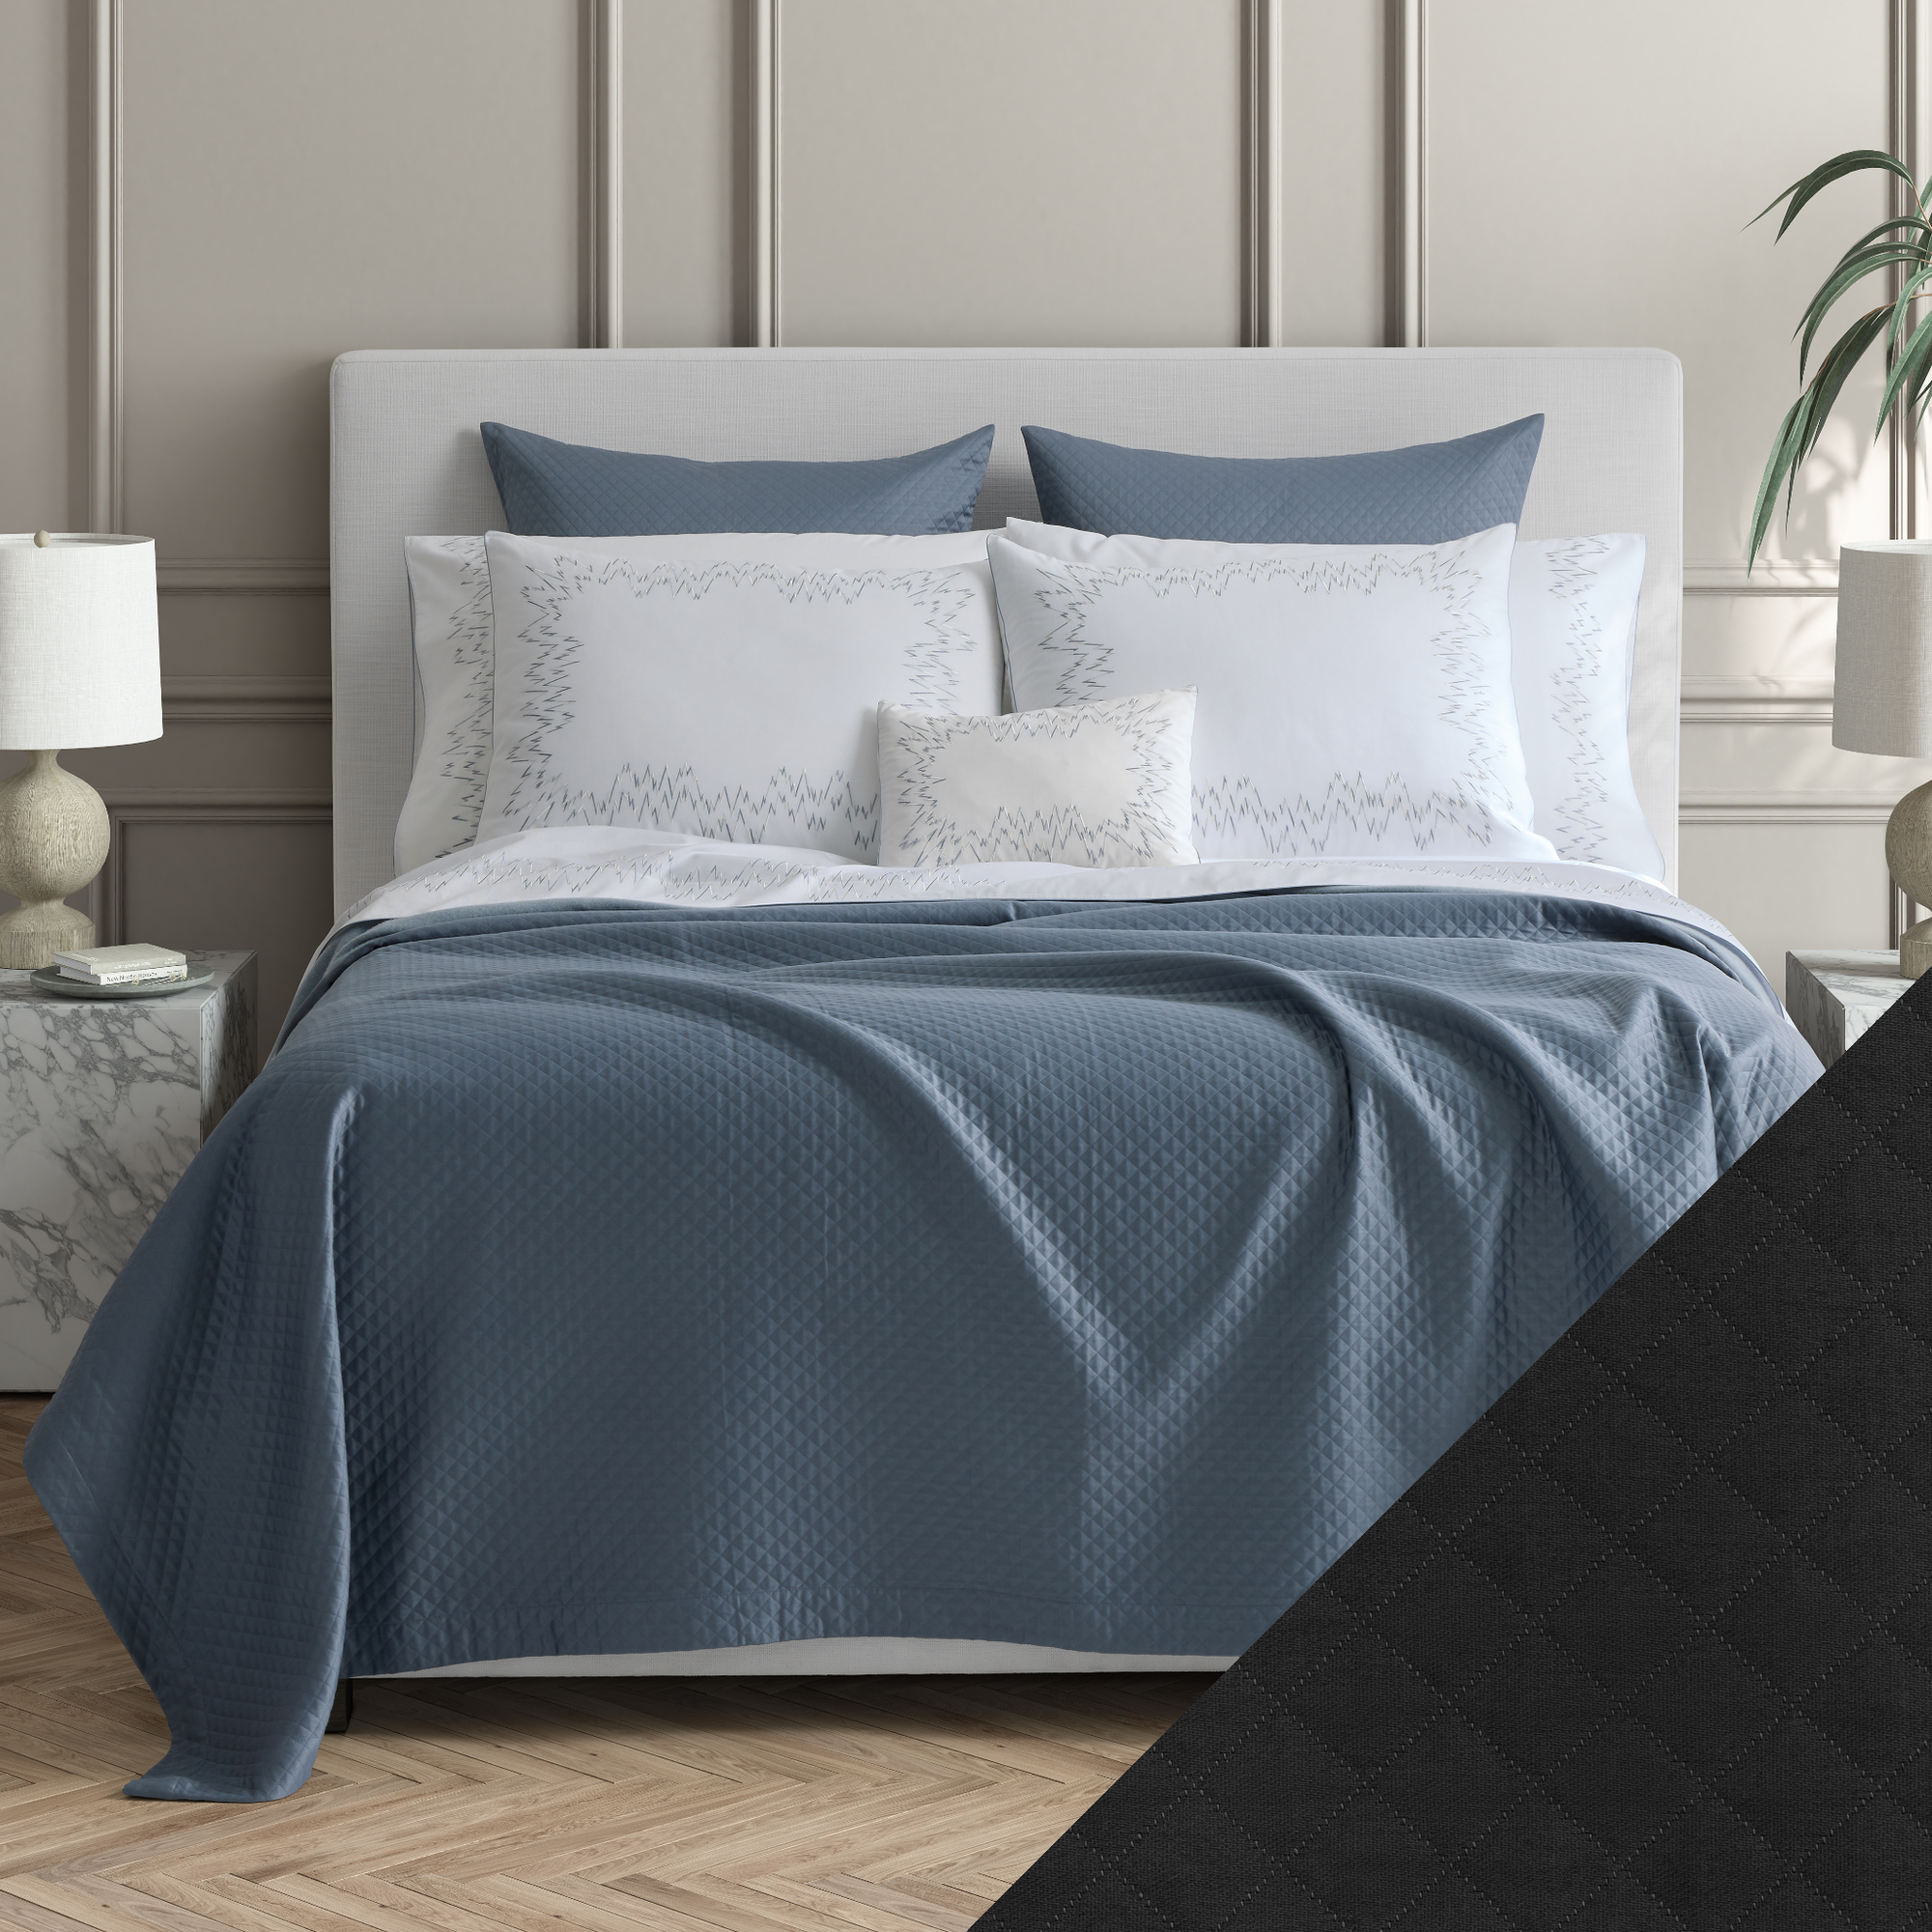 Full Bedding of Matouk Petra Collection with Black Swatch